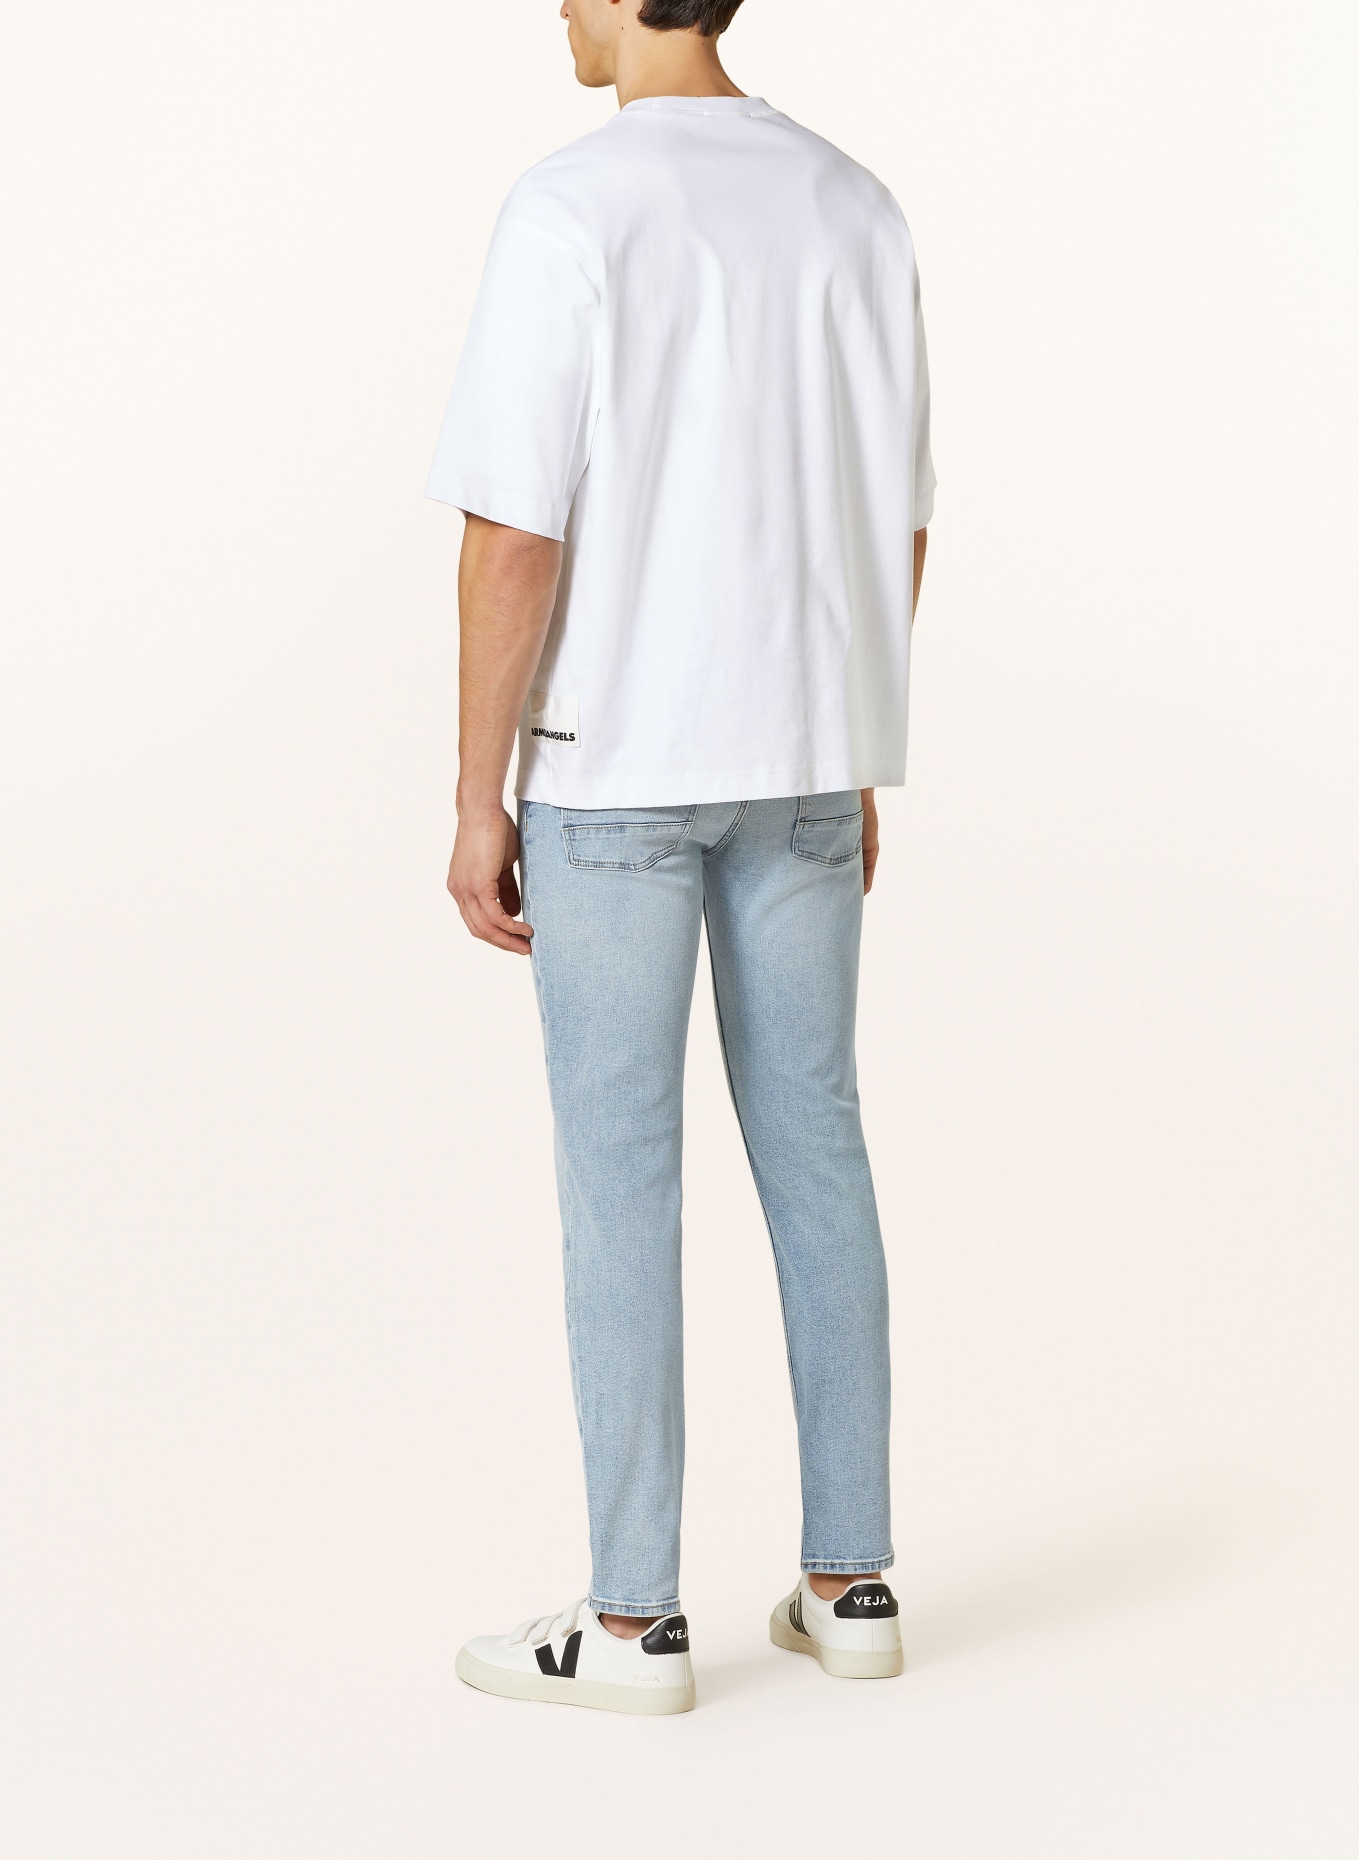 Marc O'Polo Jeans shaped fit, Color: 022 Light blue wash (Image 3)